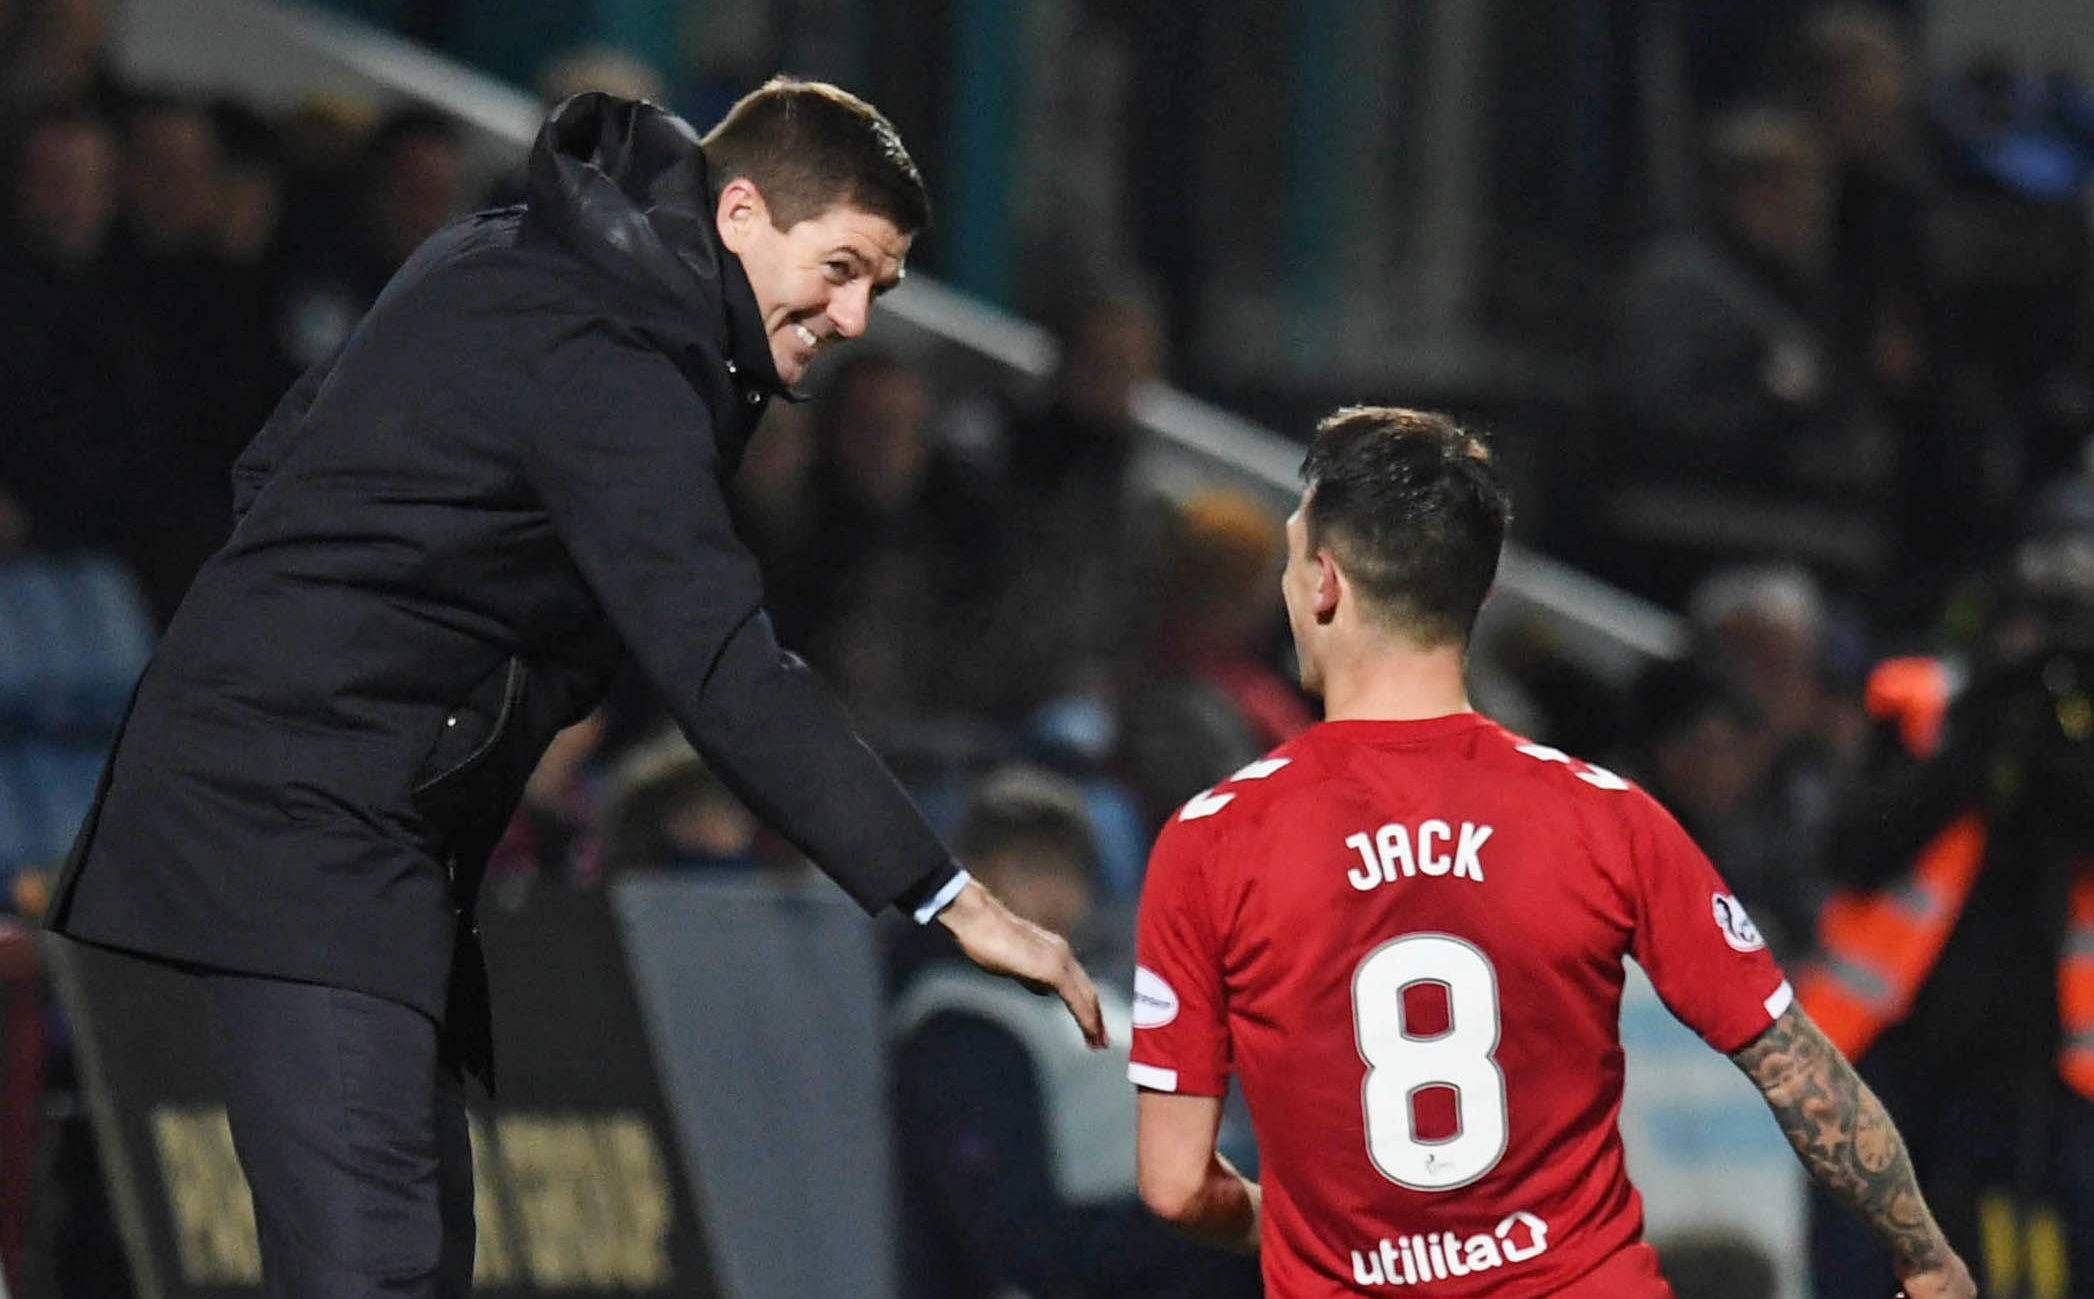 Rangers' Ryan Jack (right) celebrates his goal with manager Steven Gerrard